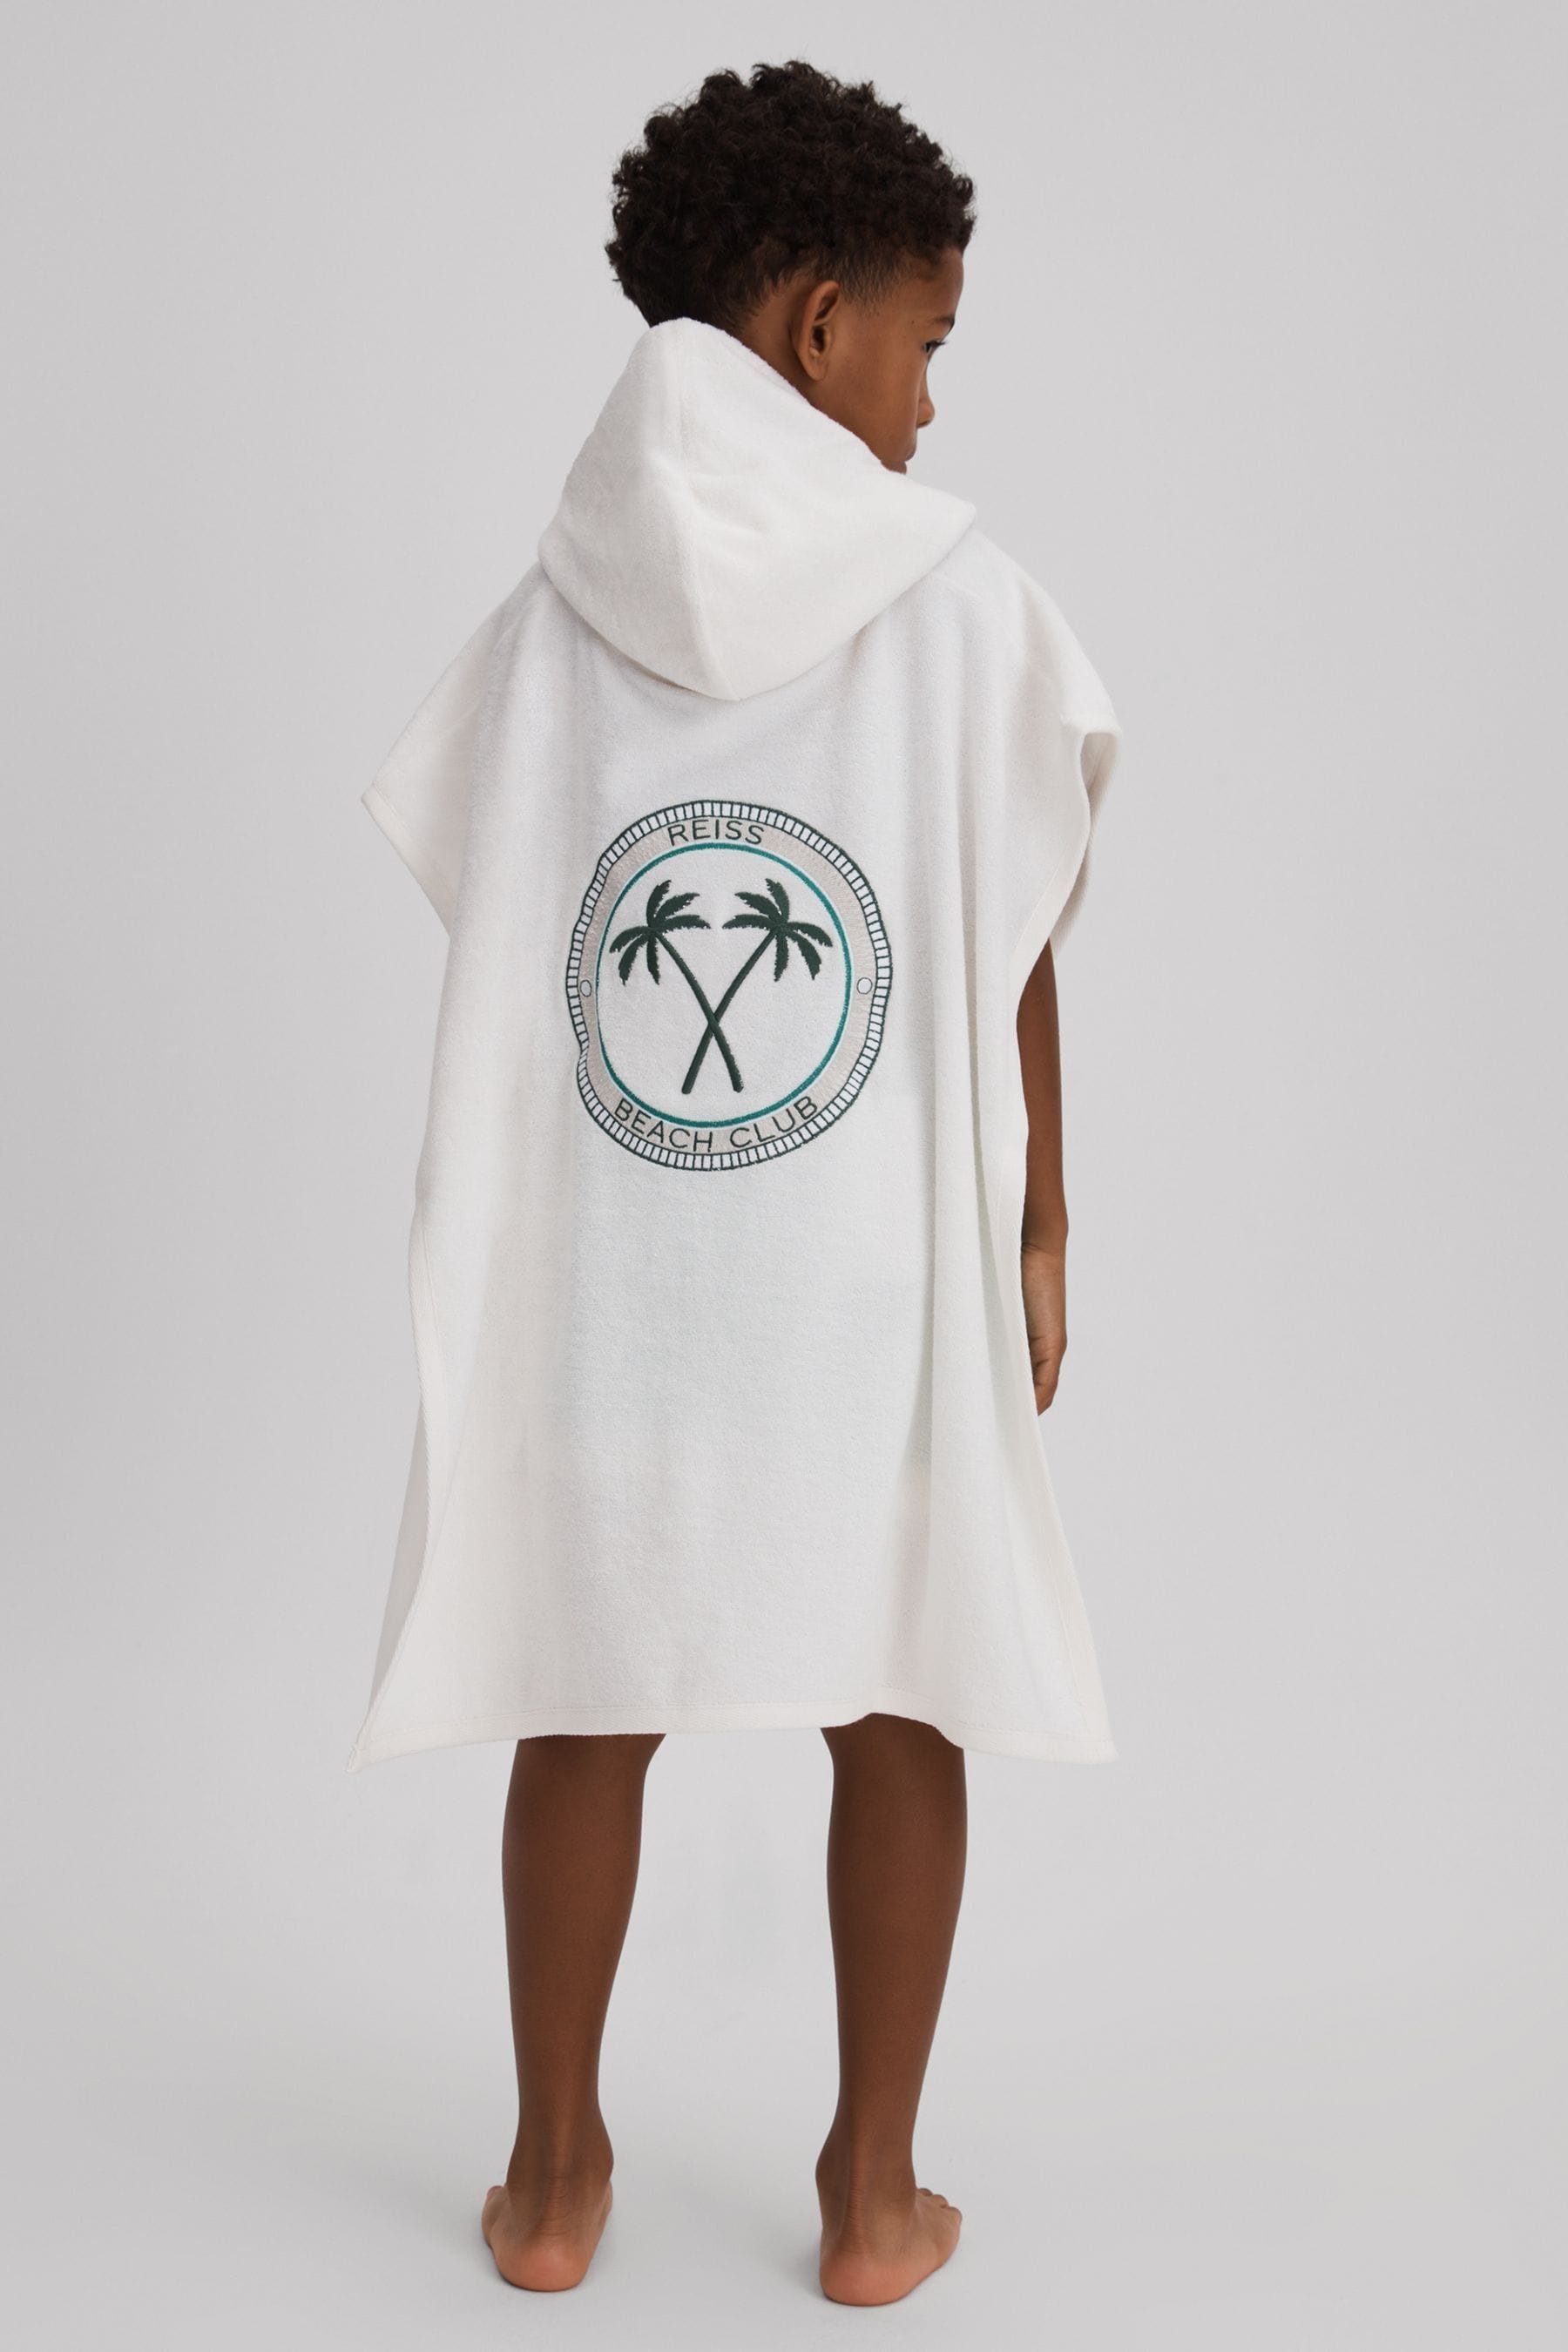 Reiss Kids' Afar - White Cotton Blend Hooded Poncho, Age 8-9 Years